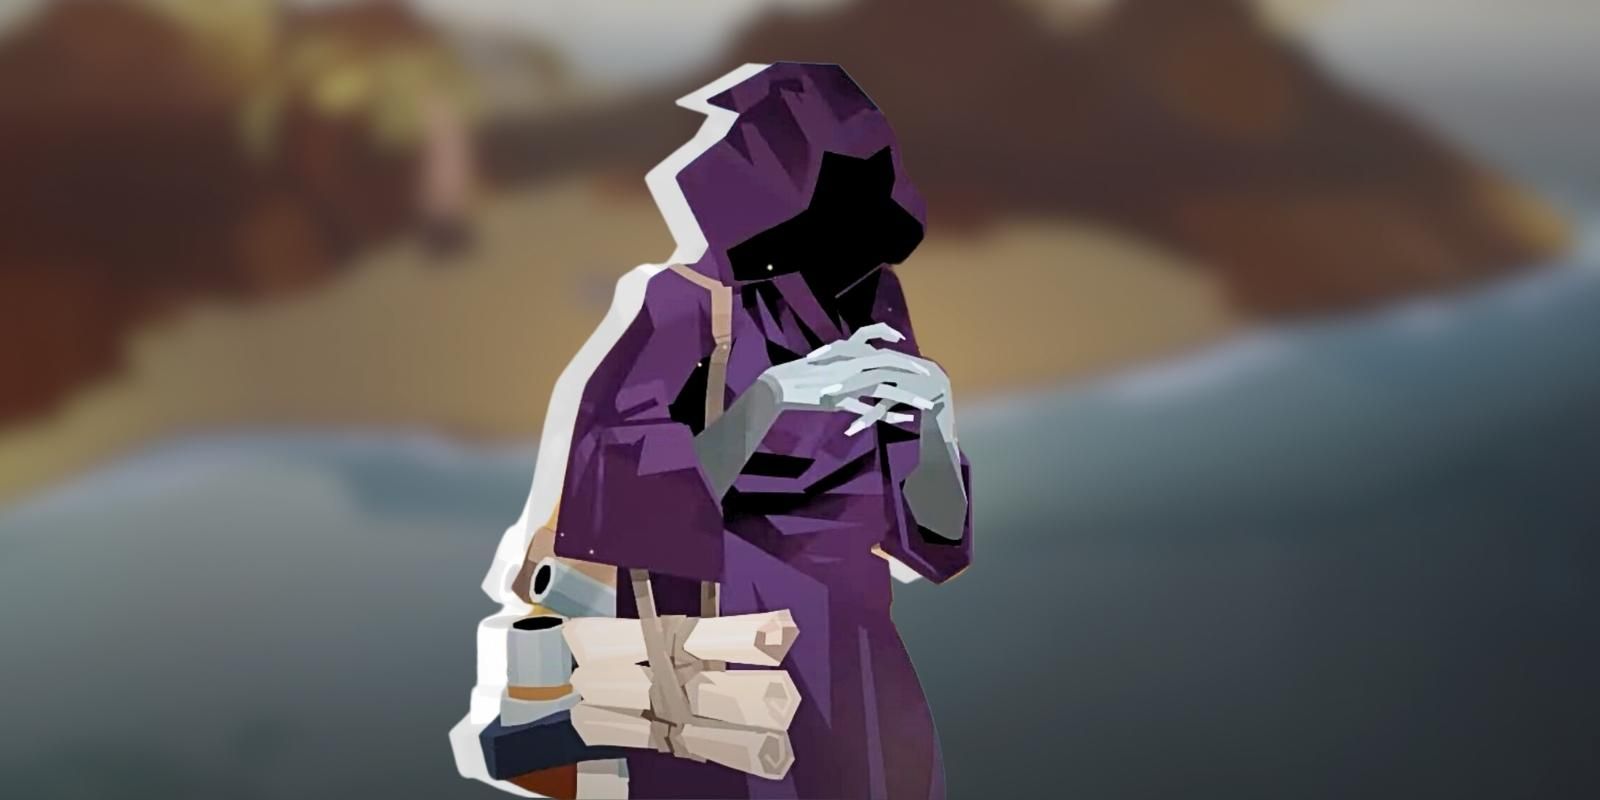 The Figure from the Violet side quest in Dredge